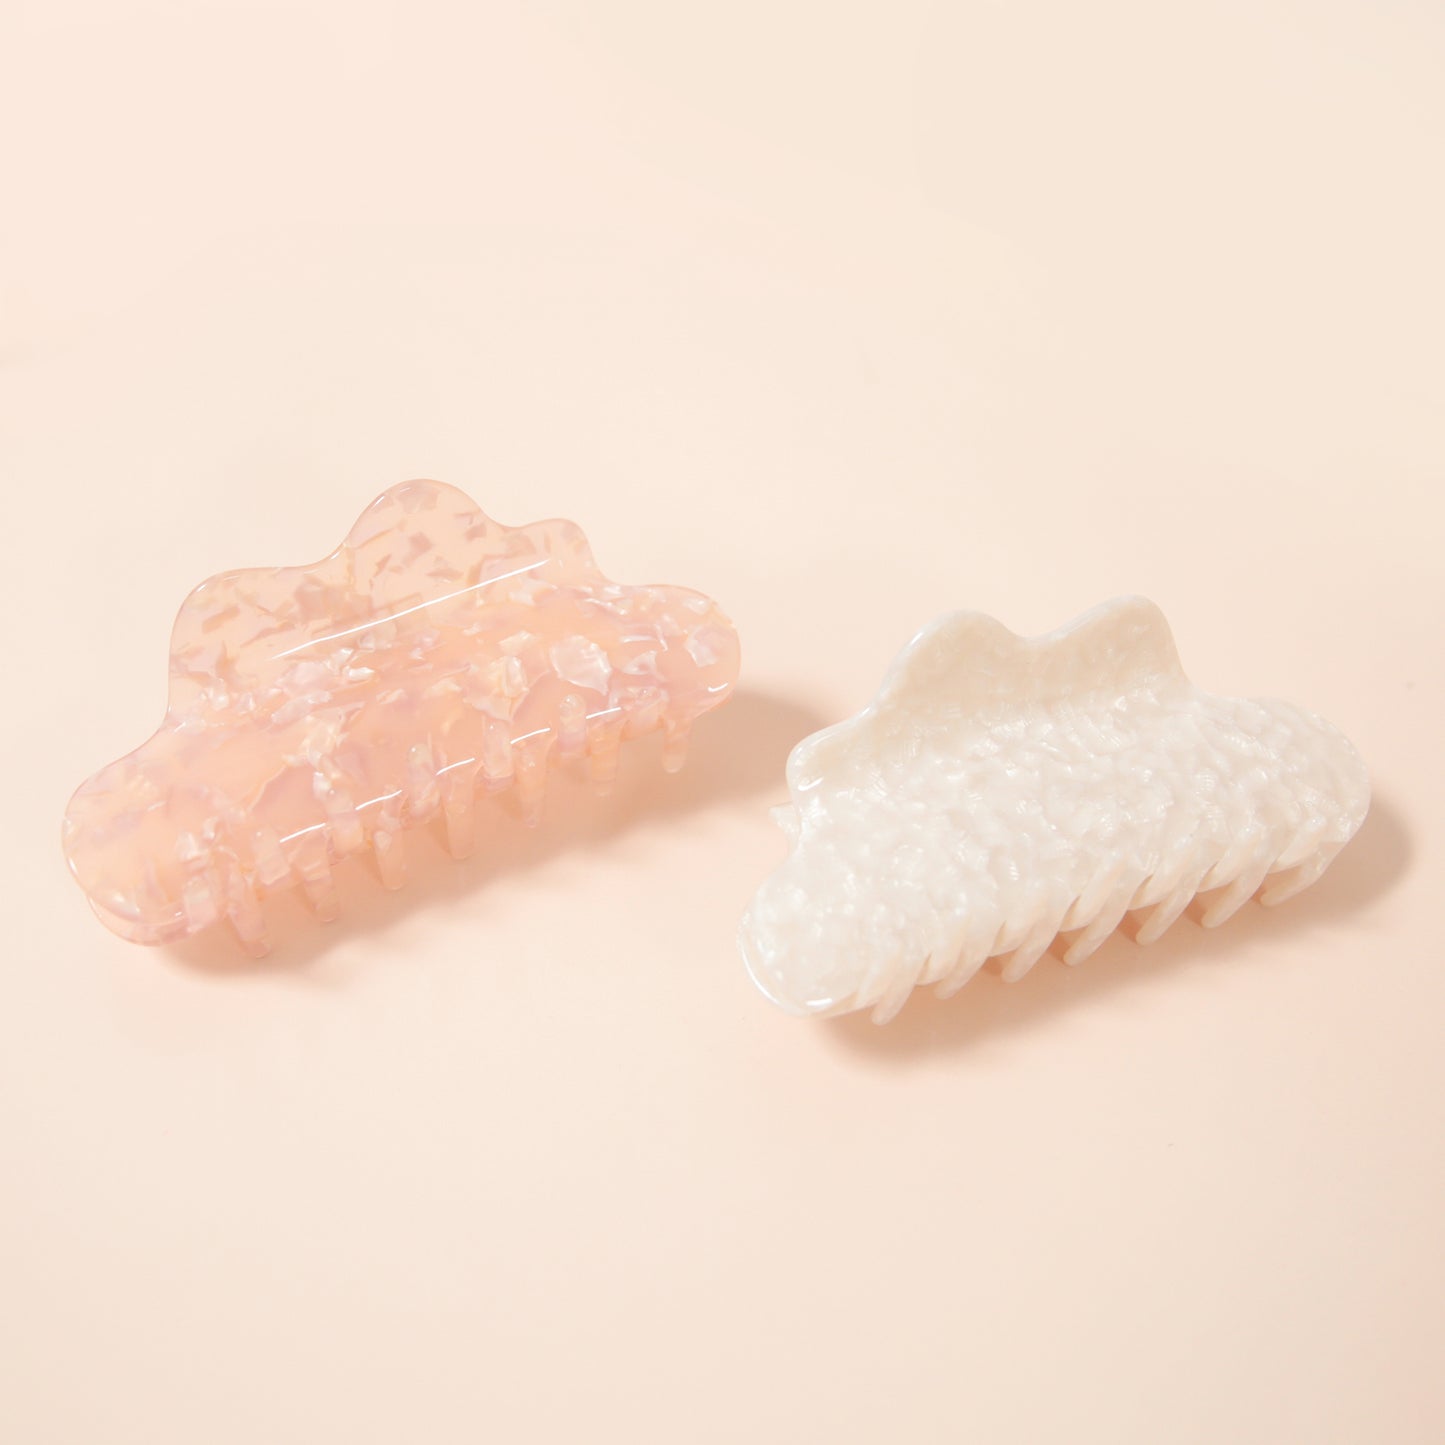 A claw clip featuring a wavy edge detail and along with specks of shine throughout the neutral rosy hair accessory